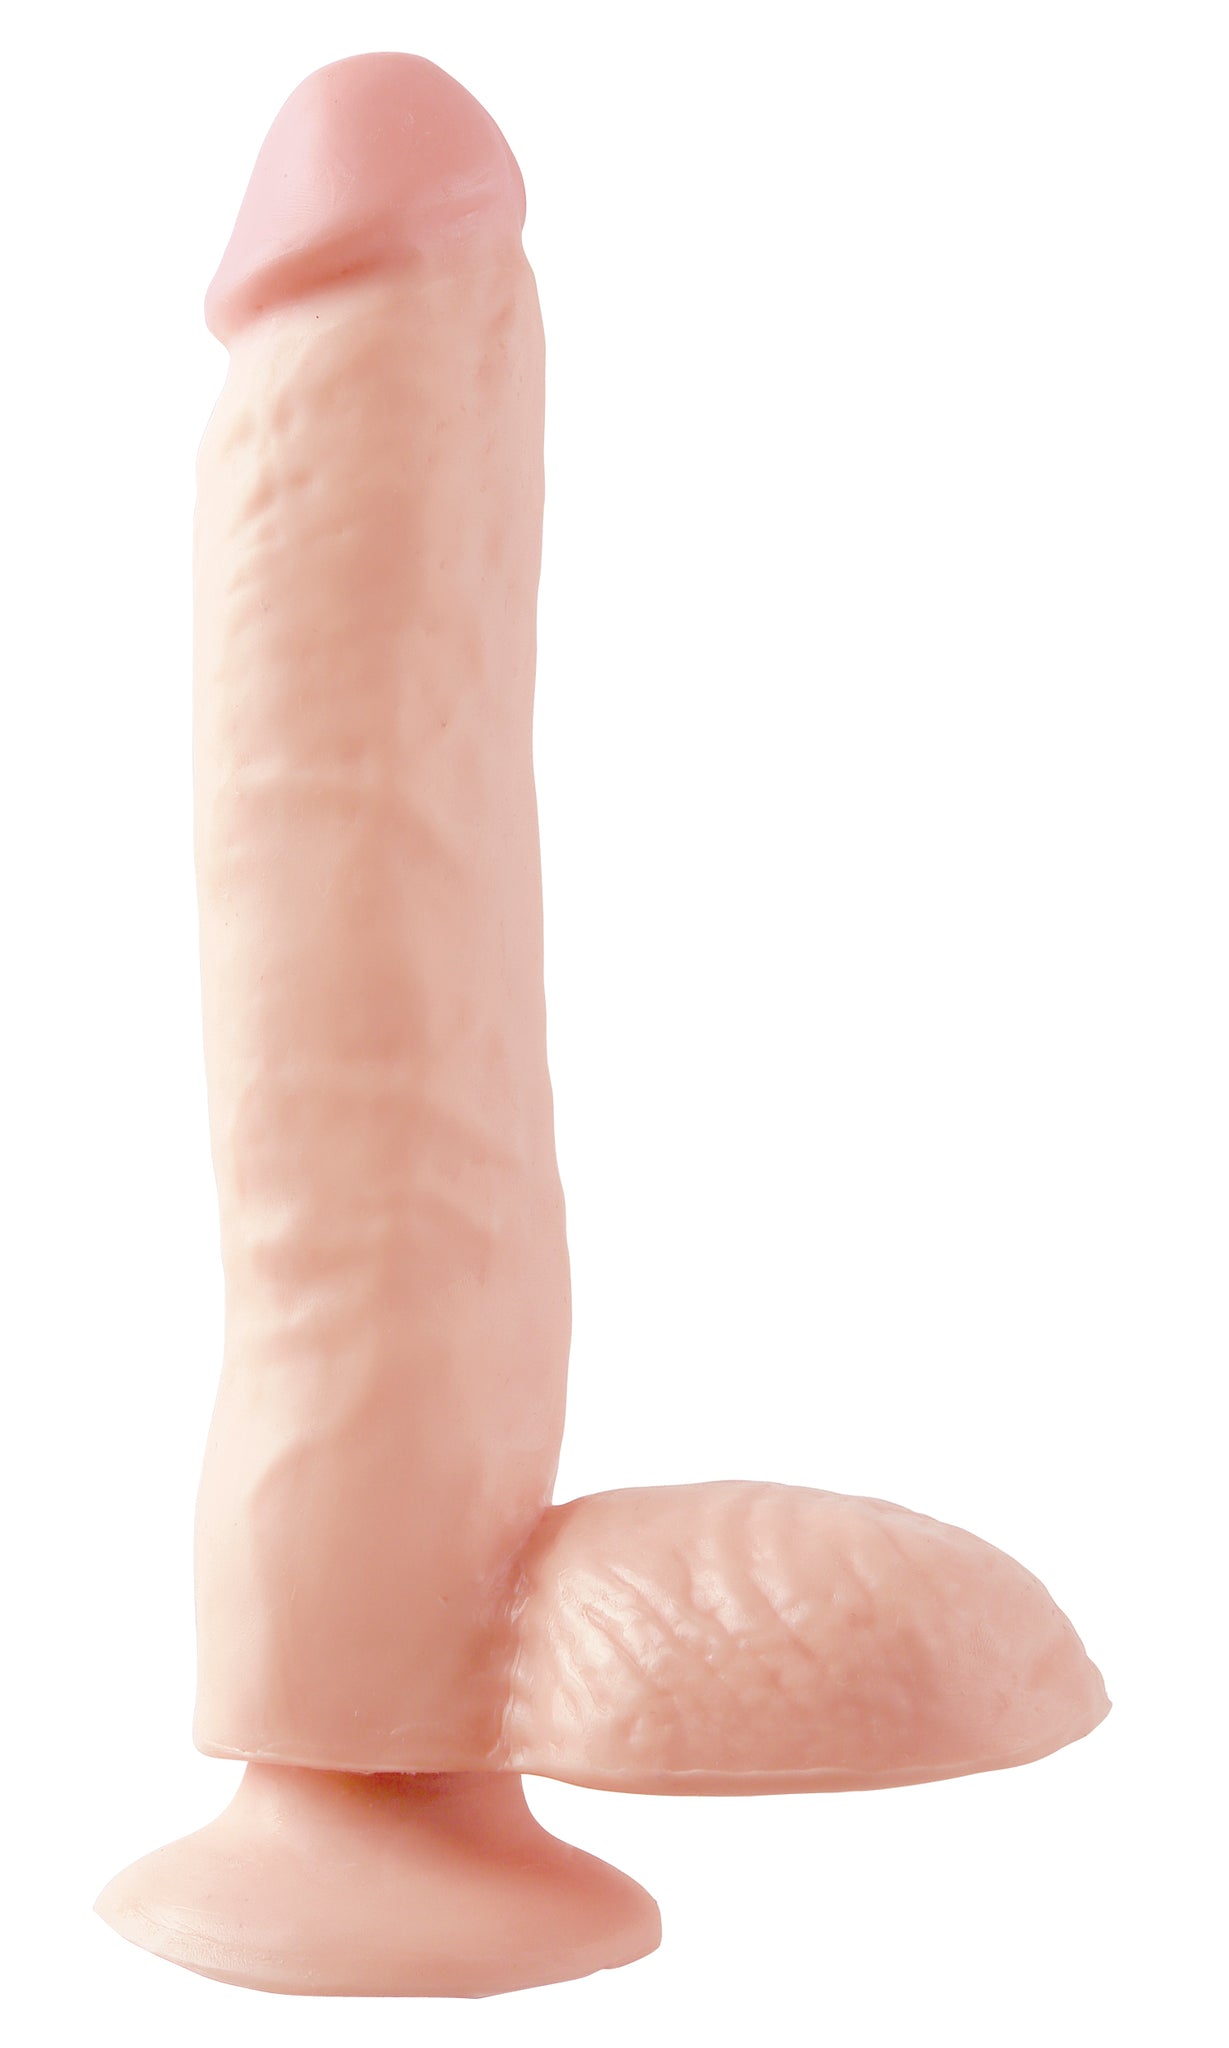 Basix Rubber Works 9 Inch Dong With Suction Cup